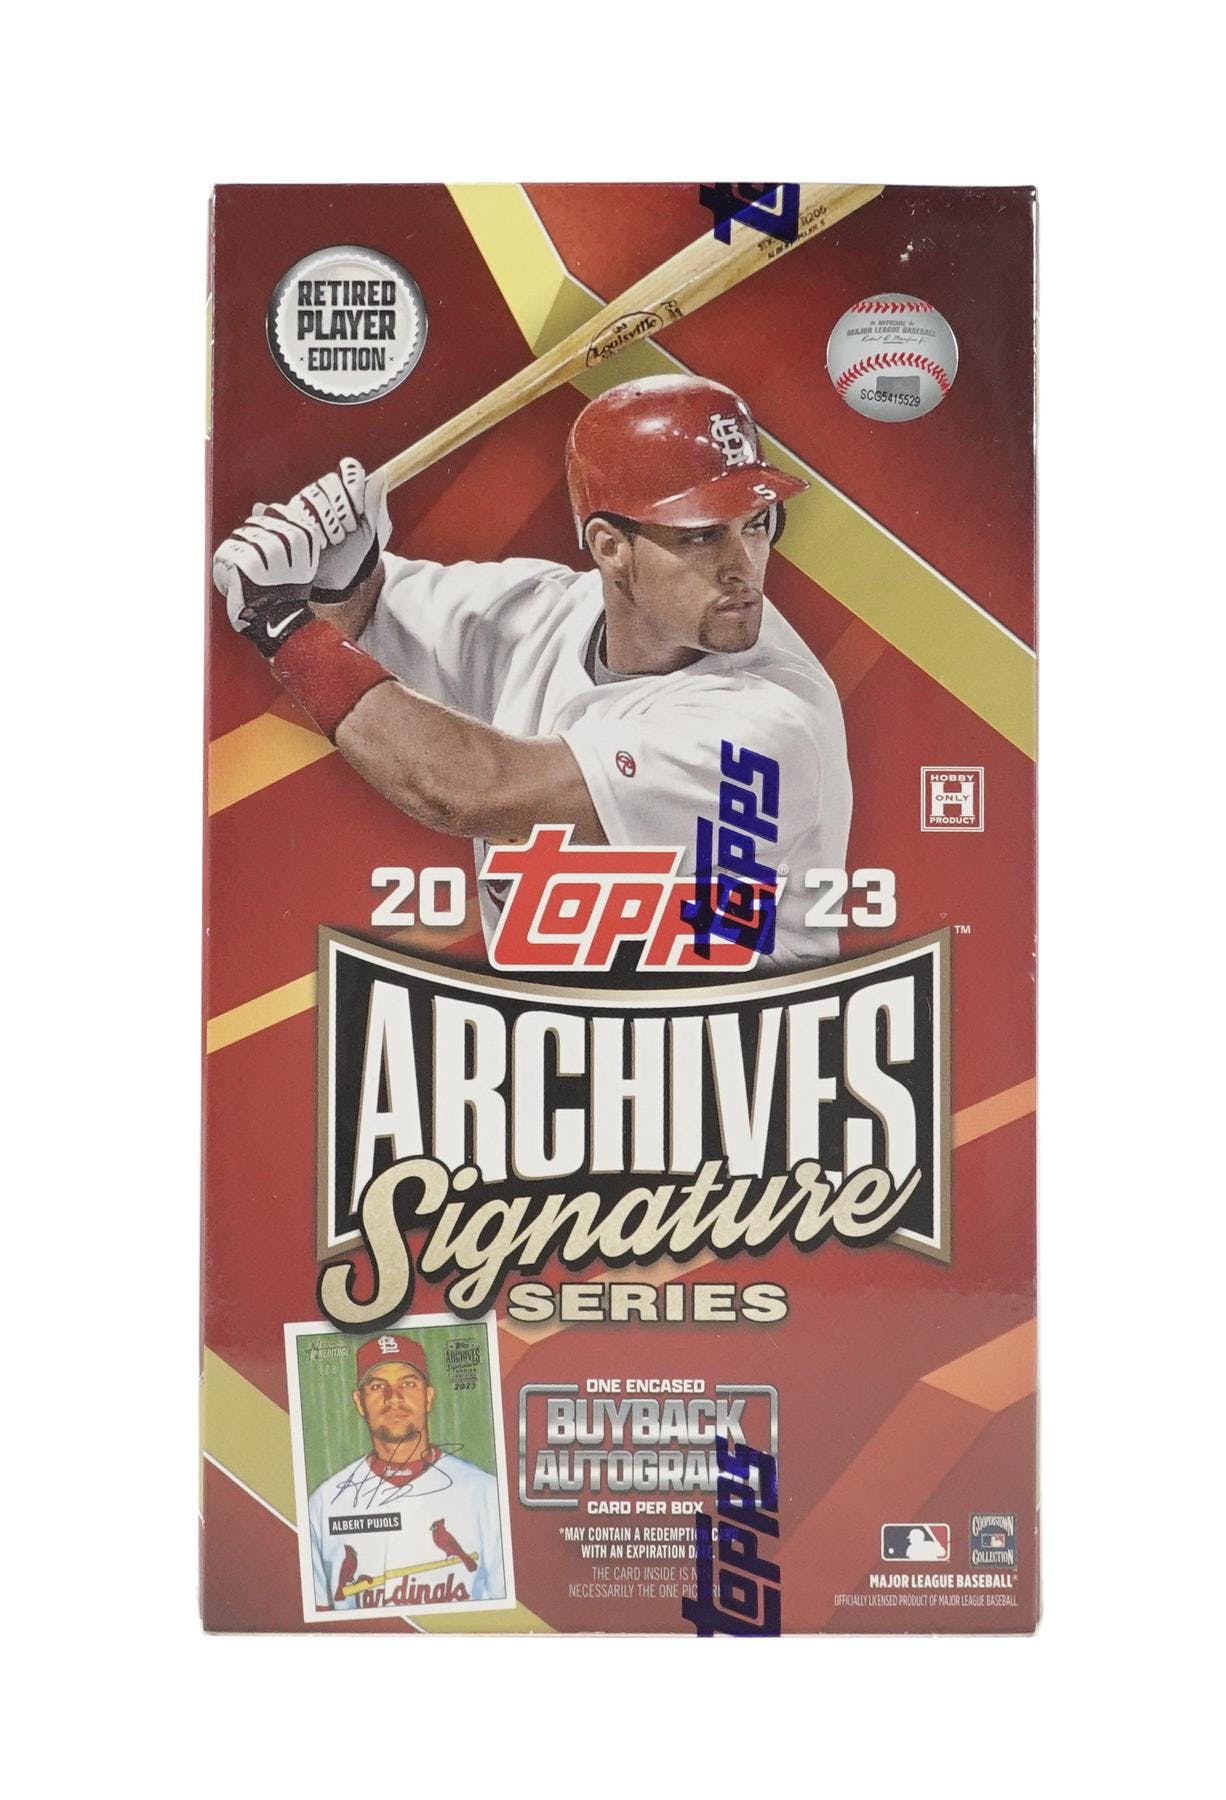 2023 Topps Archives Signature Series Baseball Retired Player Edition Hobby Box